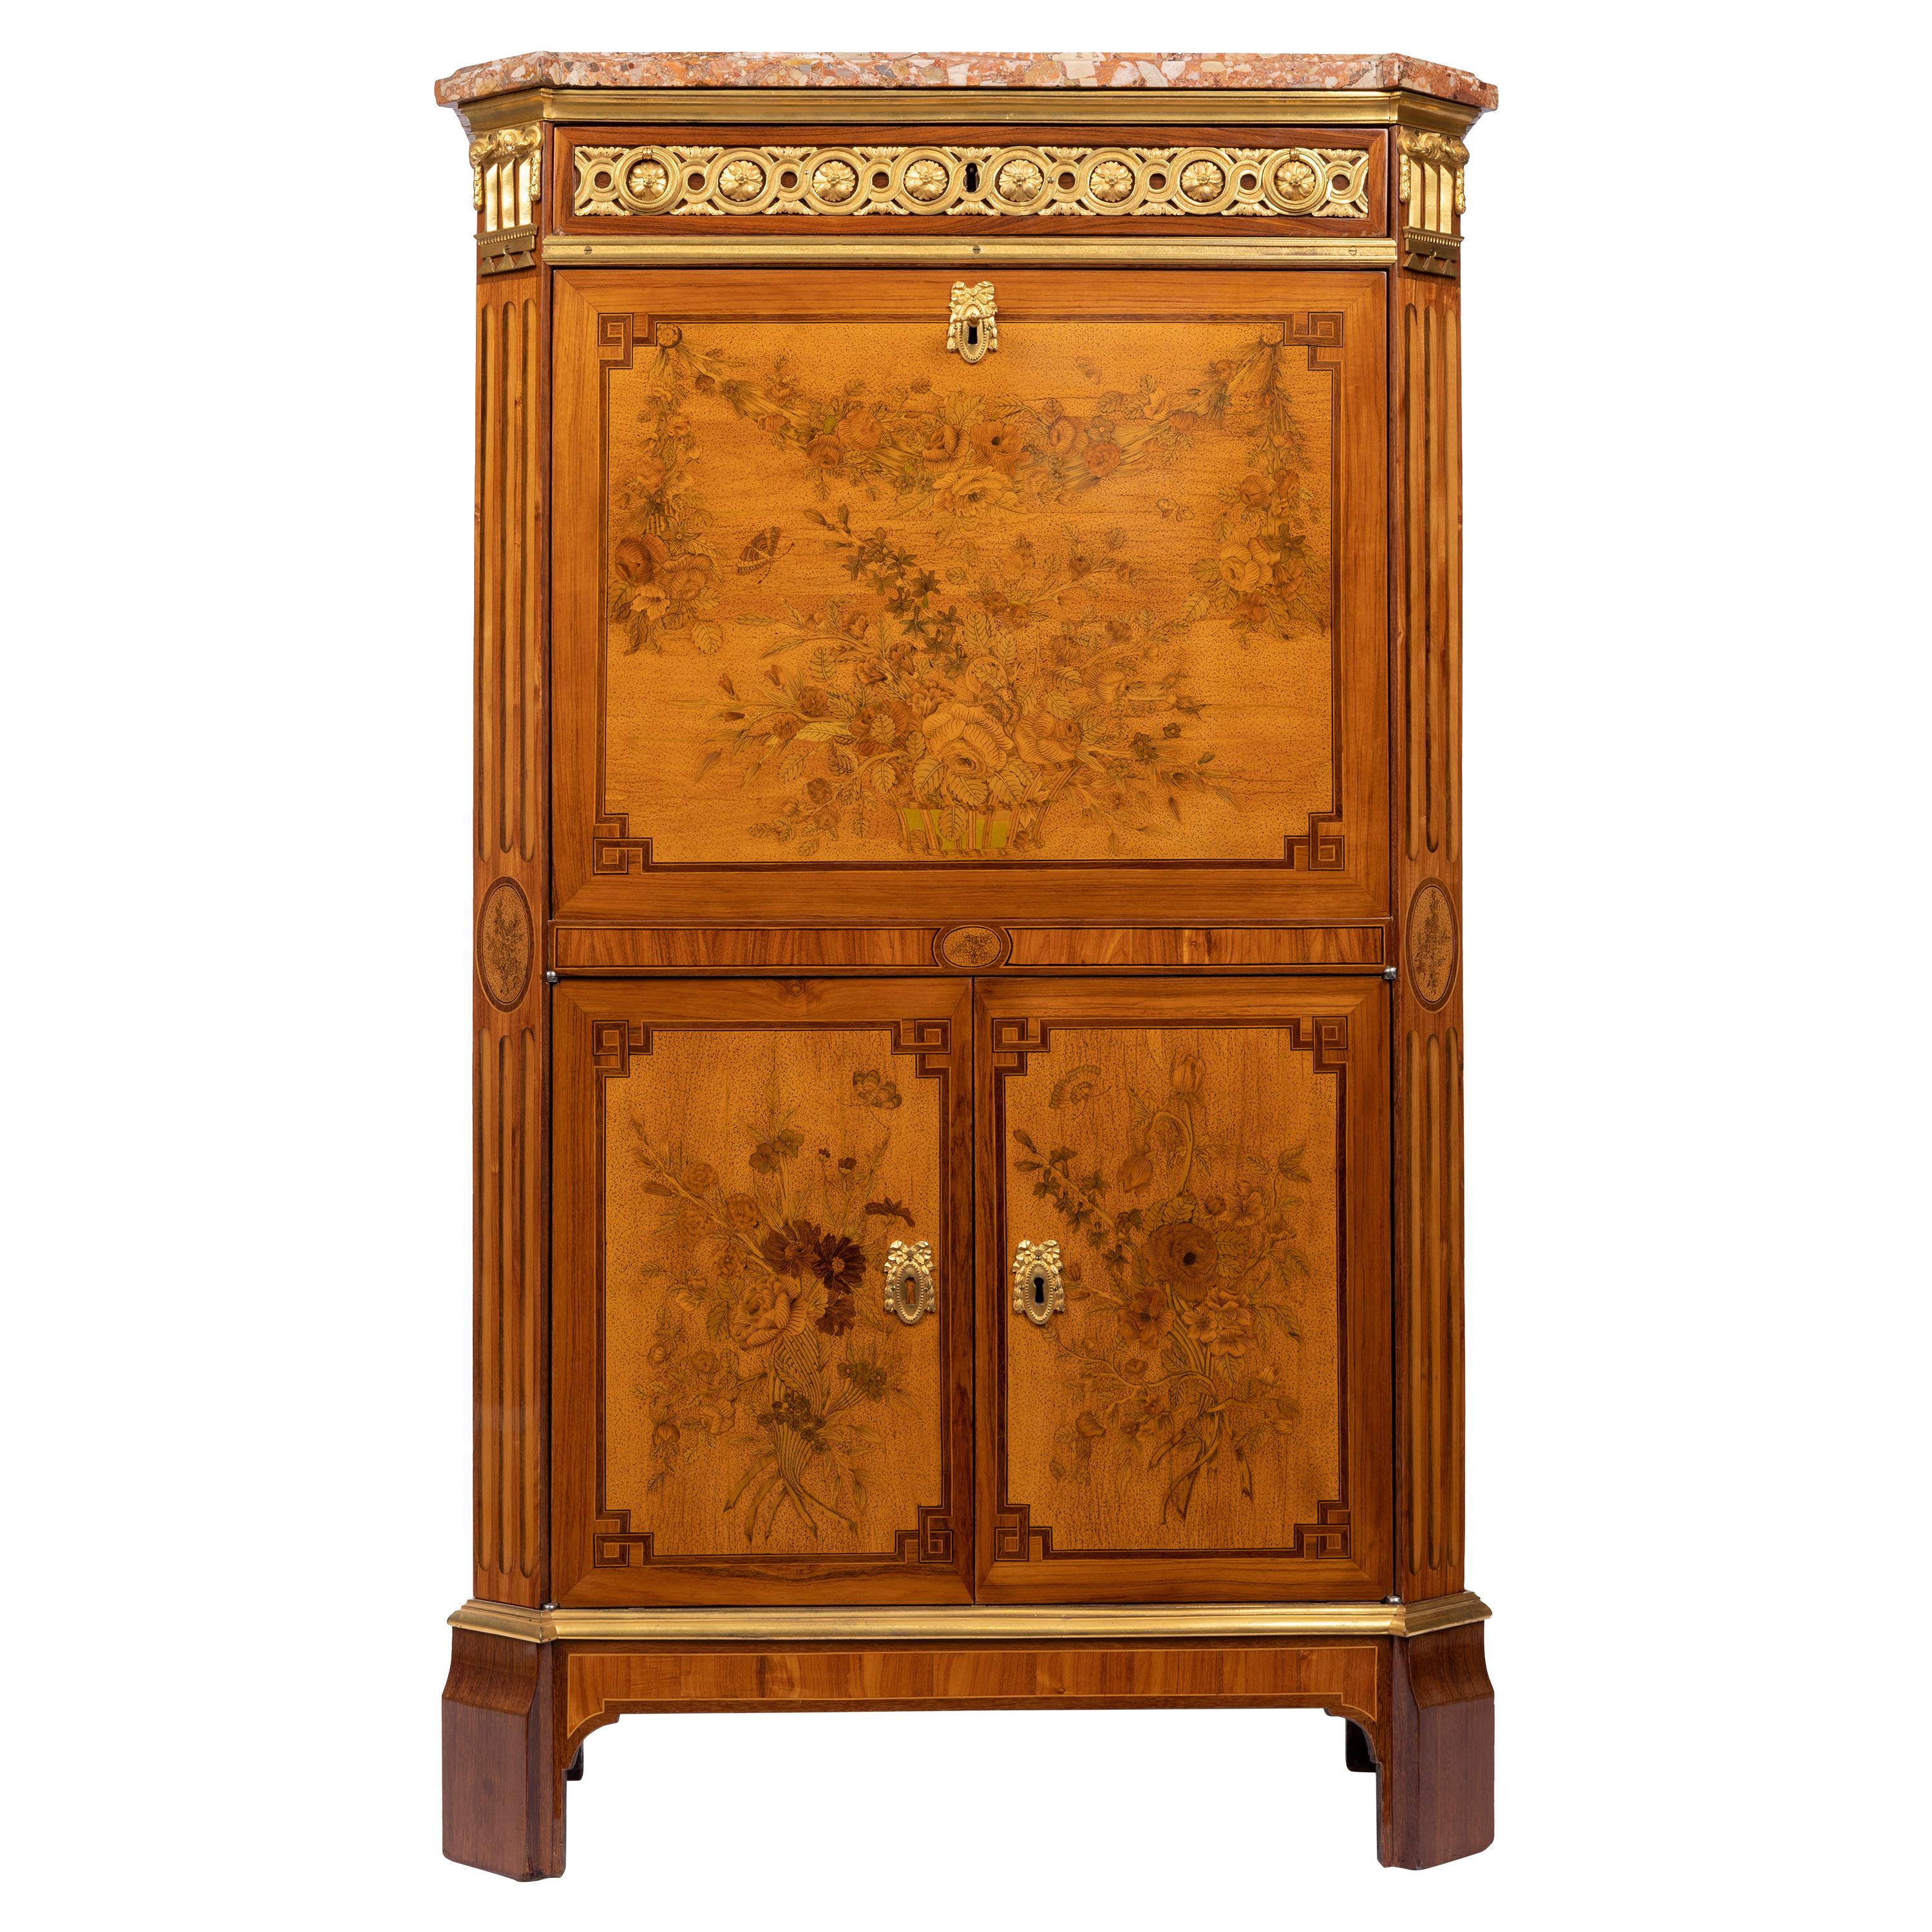 Desk in Flower Marquetry, Louis XVI Period, Stamped C. Topino, 18th Century For Sale